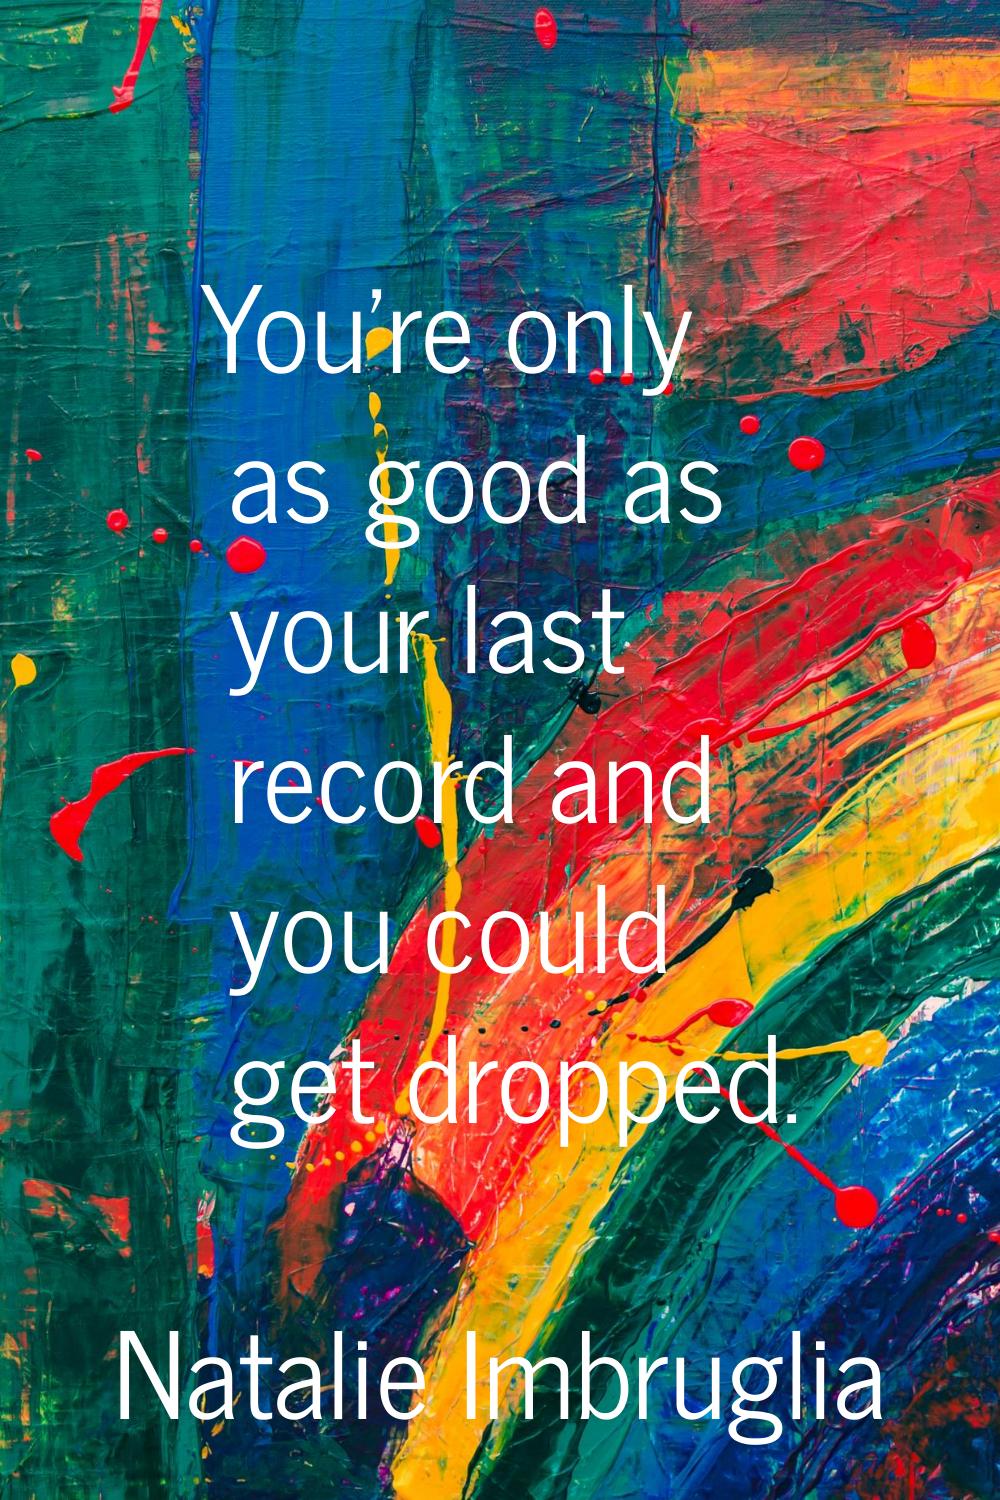 You're only as good as your last record and you could get dropped.